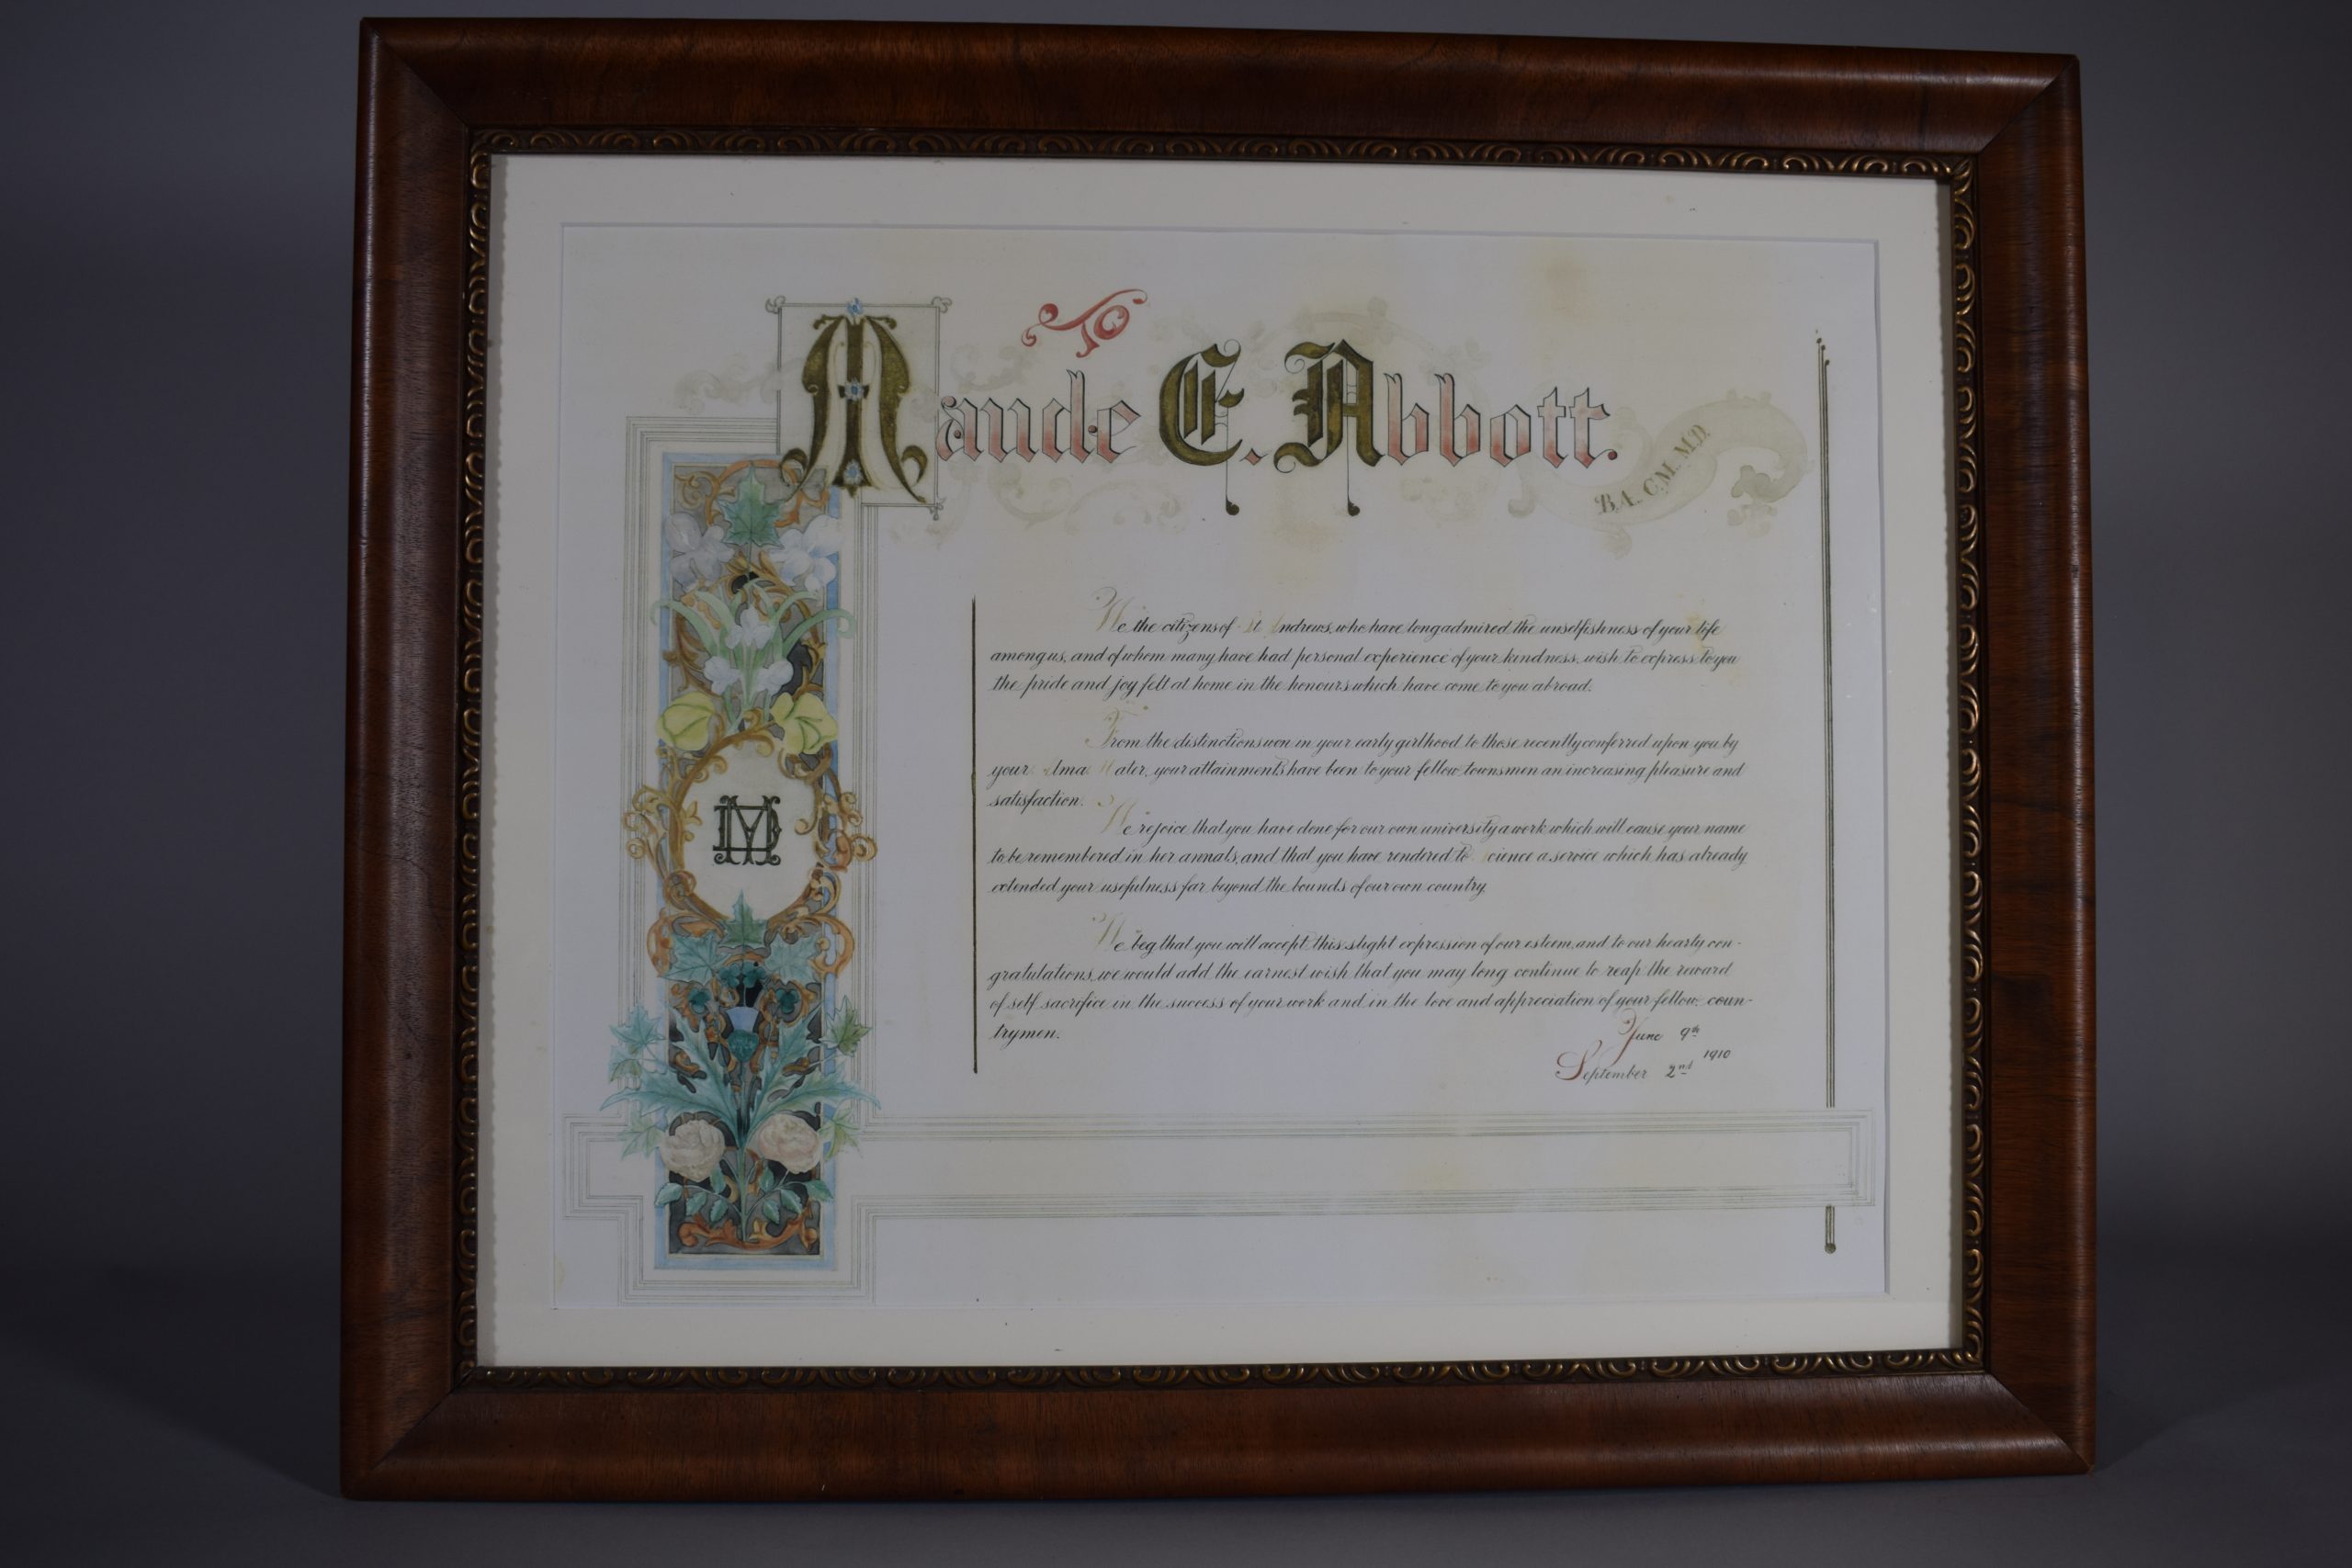 Certificate of recognition; colour. At the top, “Maude E. Abbott” with raised initials and a scroll to the right with the letters “B.A., C.M., M.D.” On the left, a banner with flowers in a black frame surrounds a golden circle with the overlapping letters “MD”.